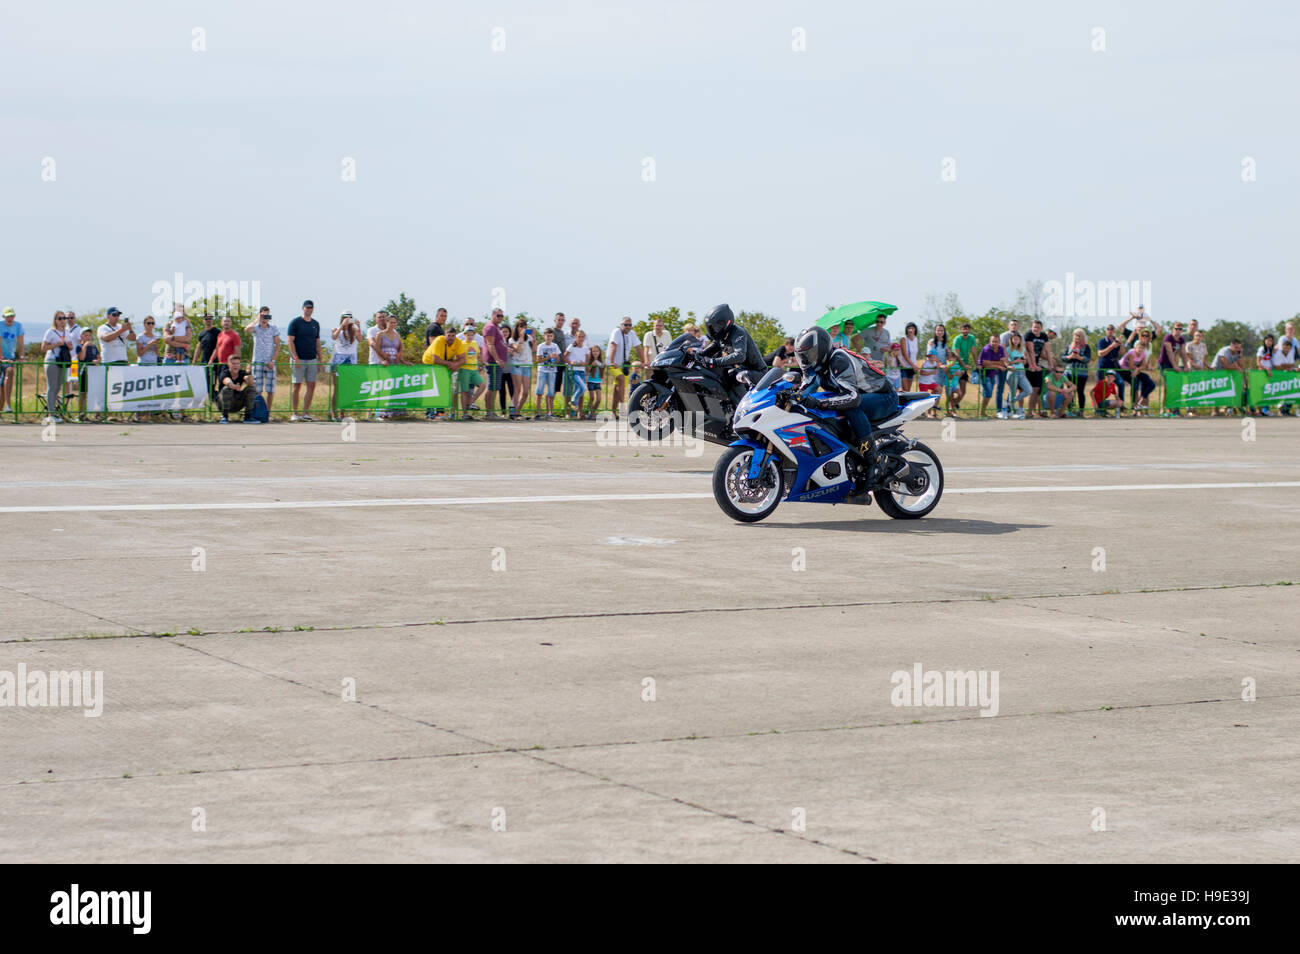 races of motorcycles on Reisinge's Drags Stock Photo